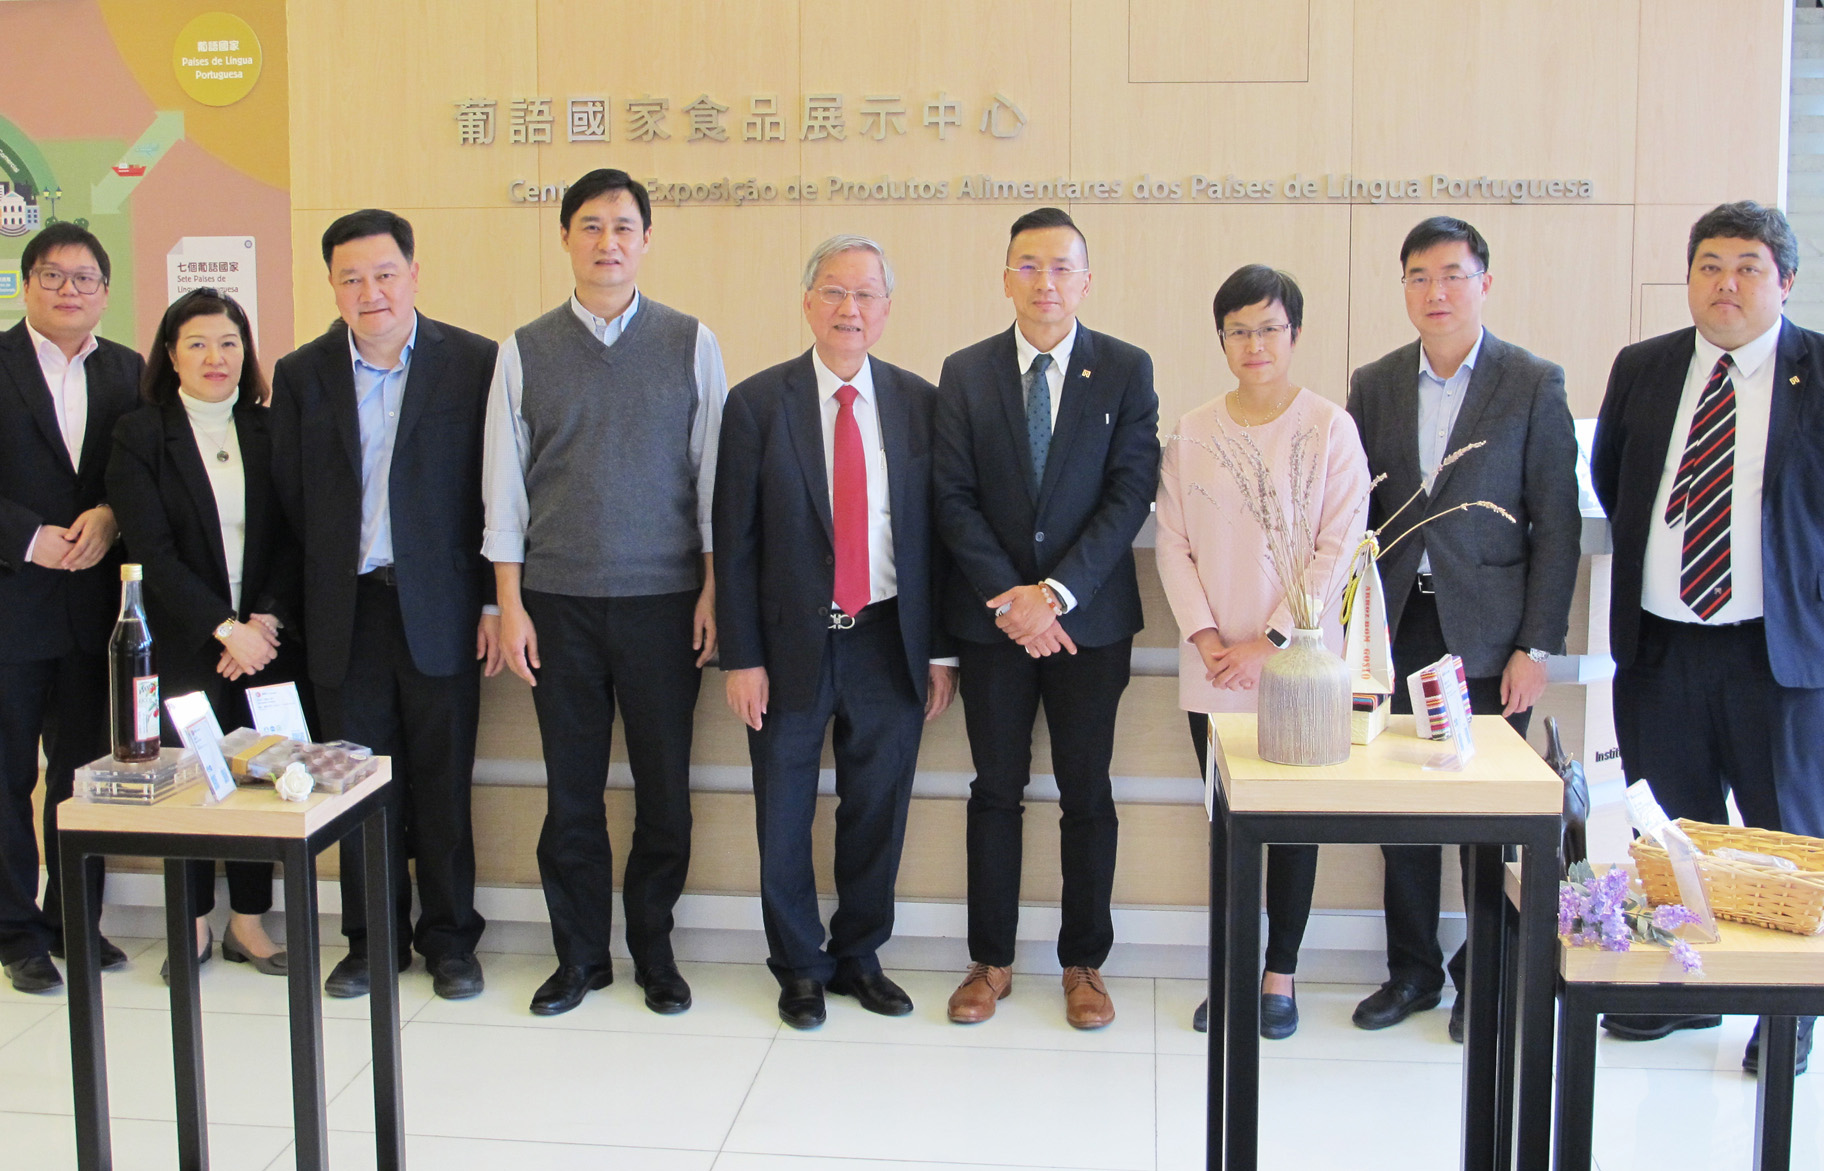 A Business Delegation from Shunde visits the Portuguese-speaking Countries Food Products Exhibition Centre <br>(7 December 2016)